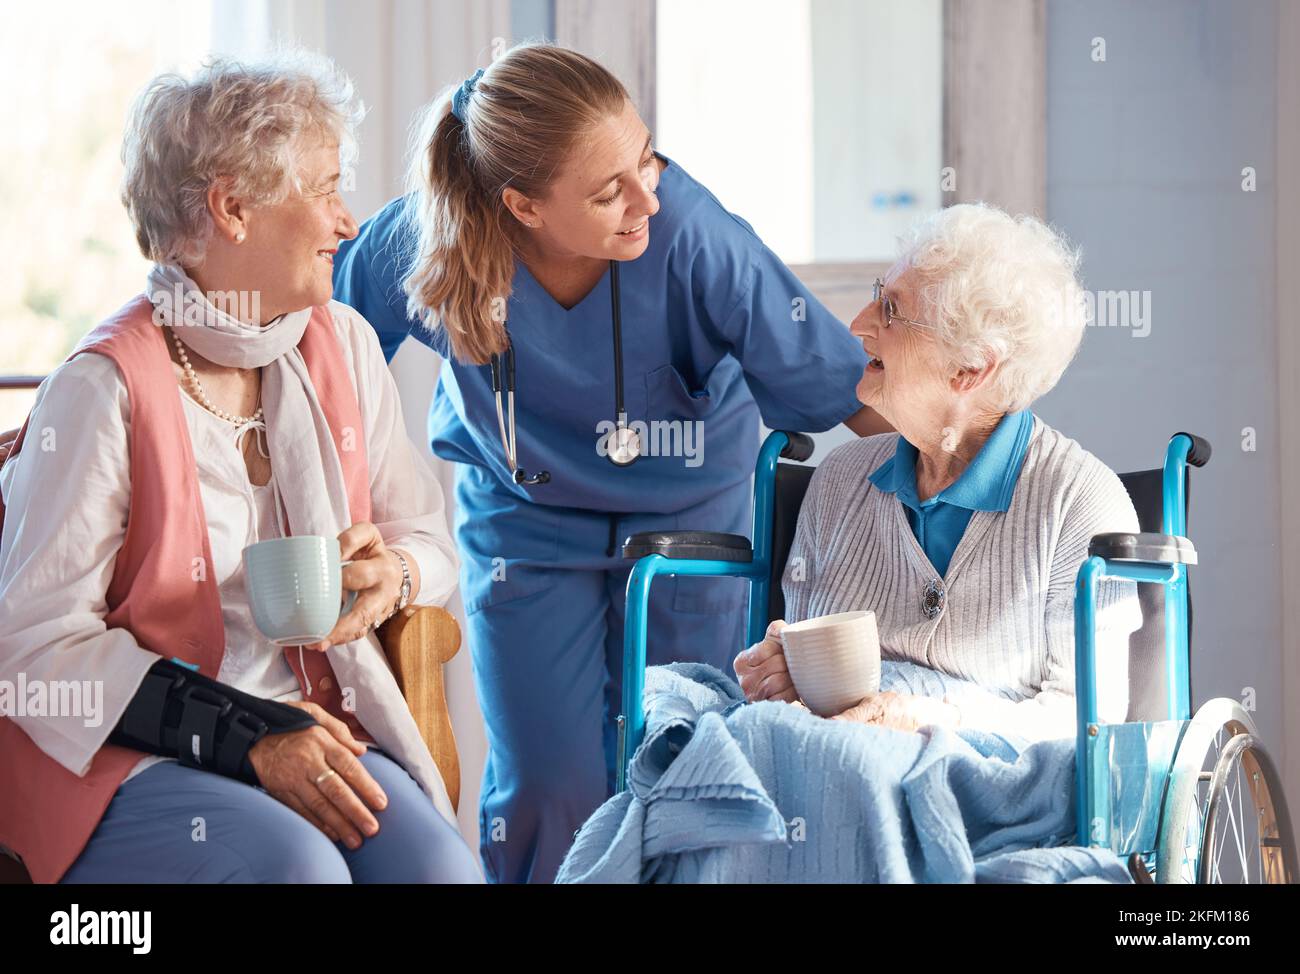 Nursing home, care and nurse with senior women doing healthcare checkup, examination or consultation. Medical, conversation and elderly woman in Stock Photo